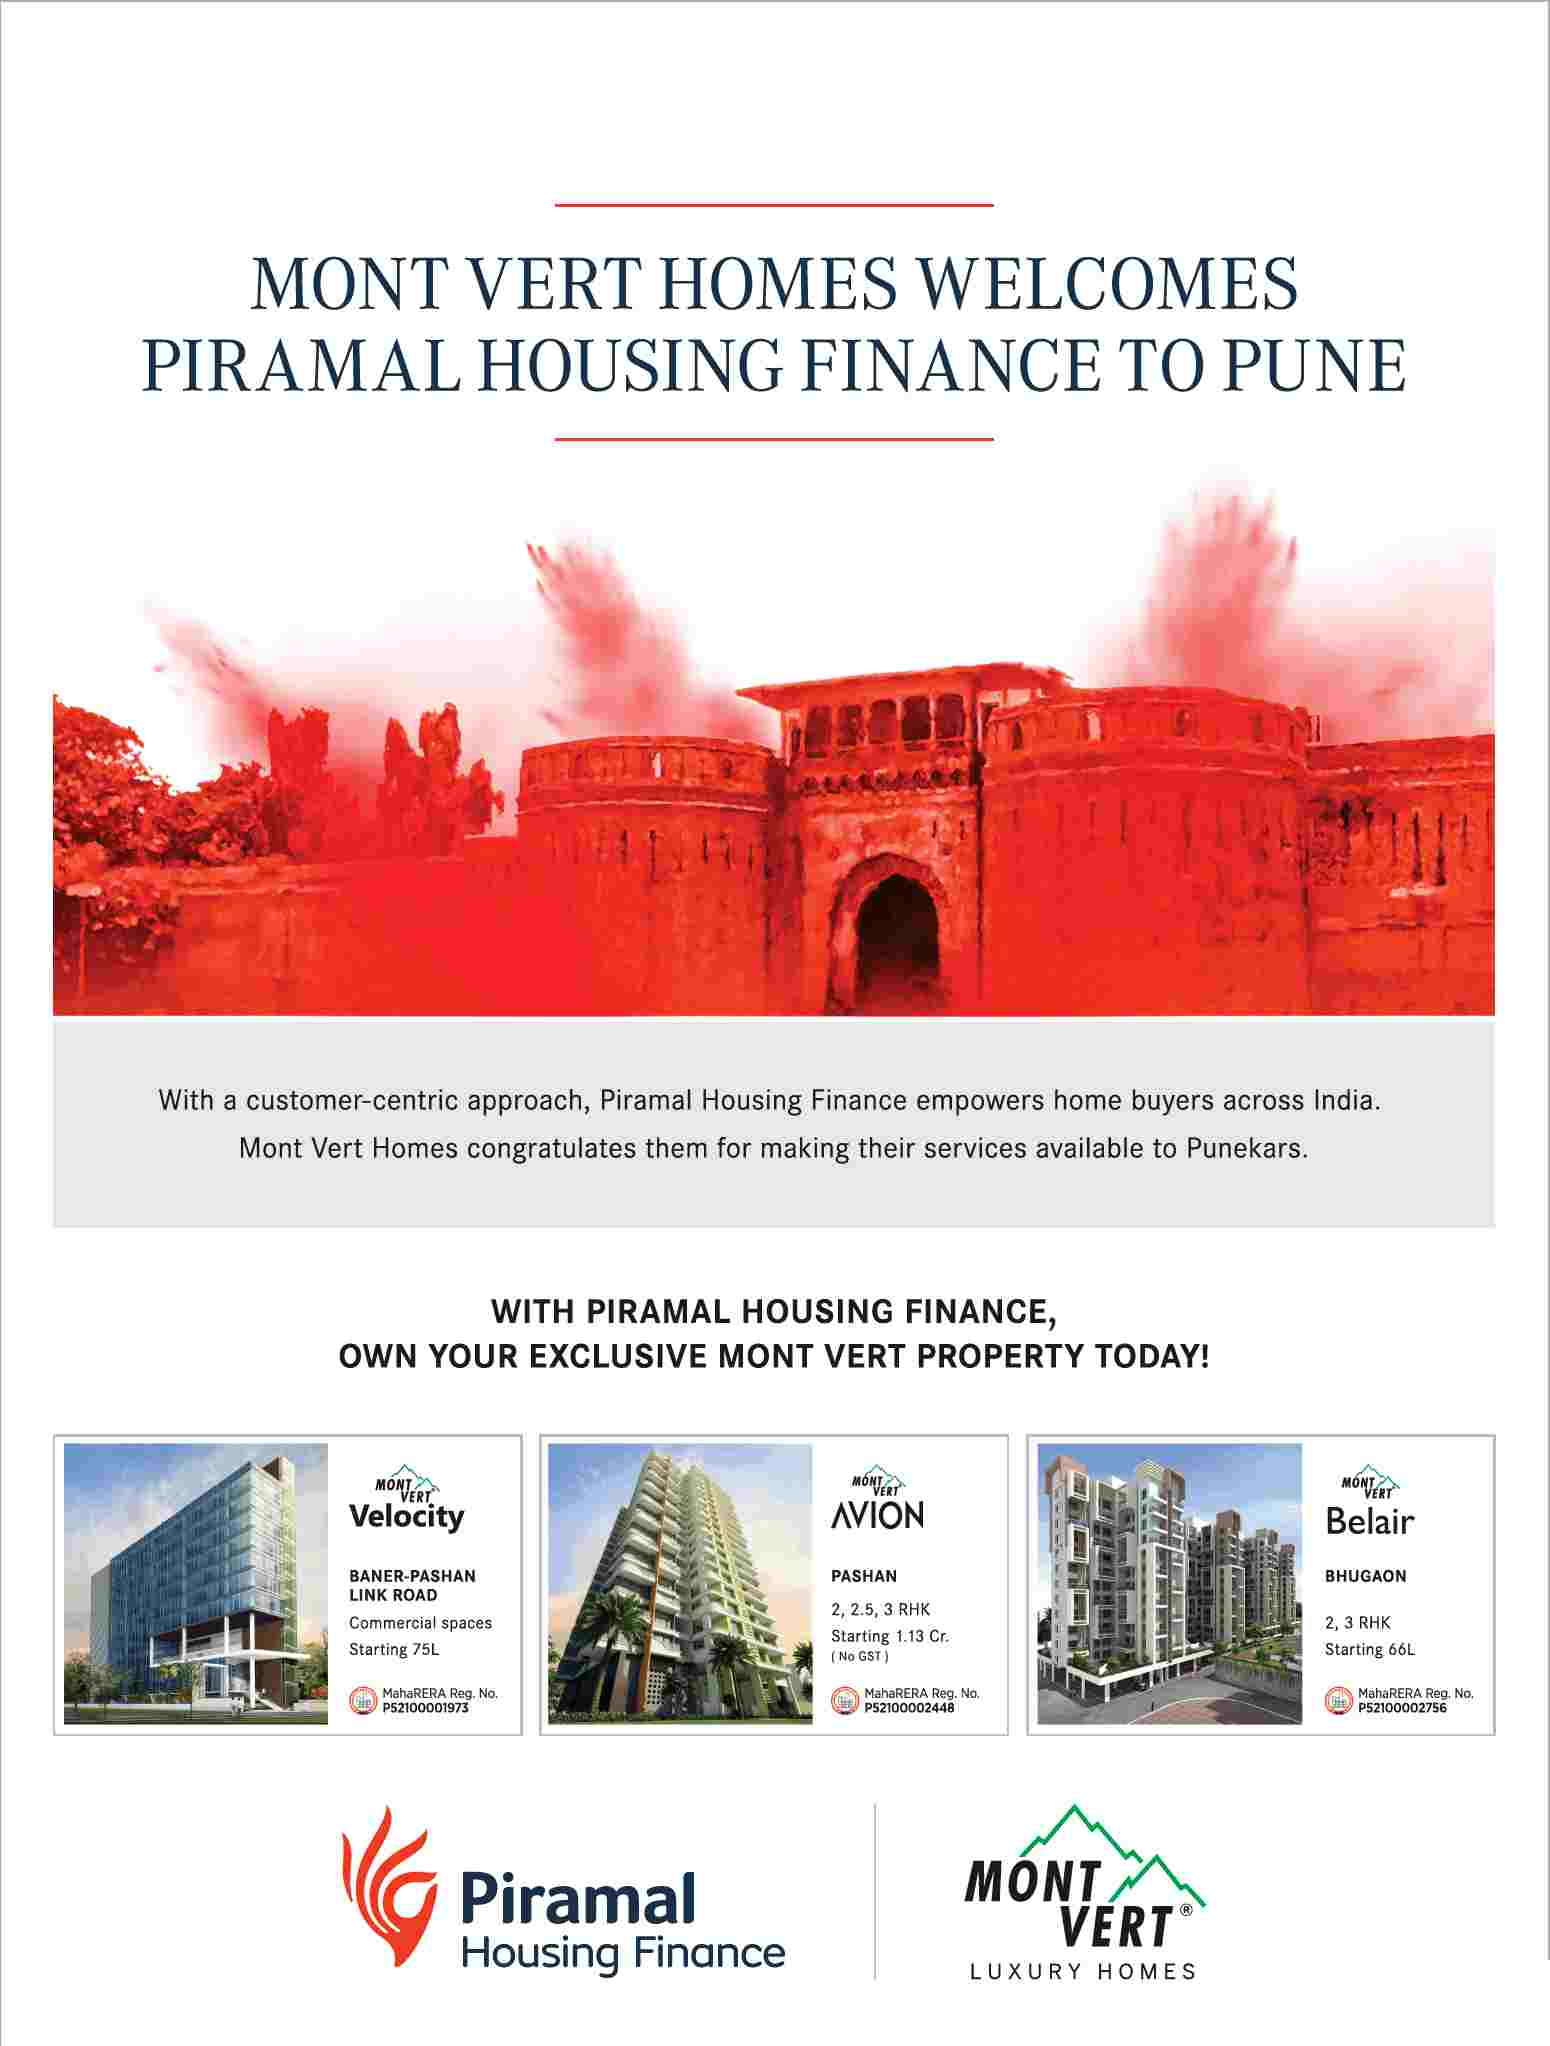 Own exclusive Mont Vert property today with Piramal Housing Finance in Pune Update